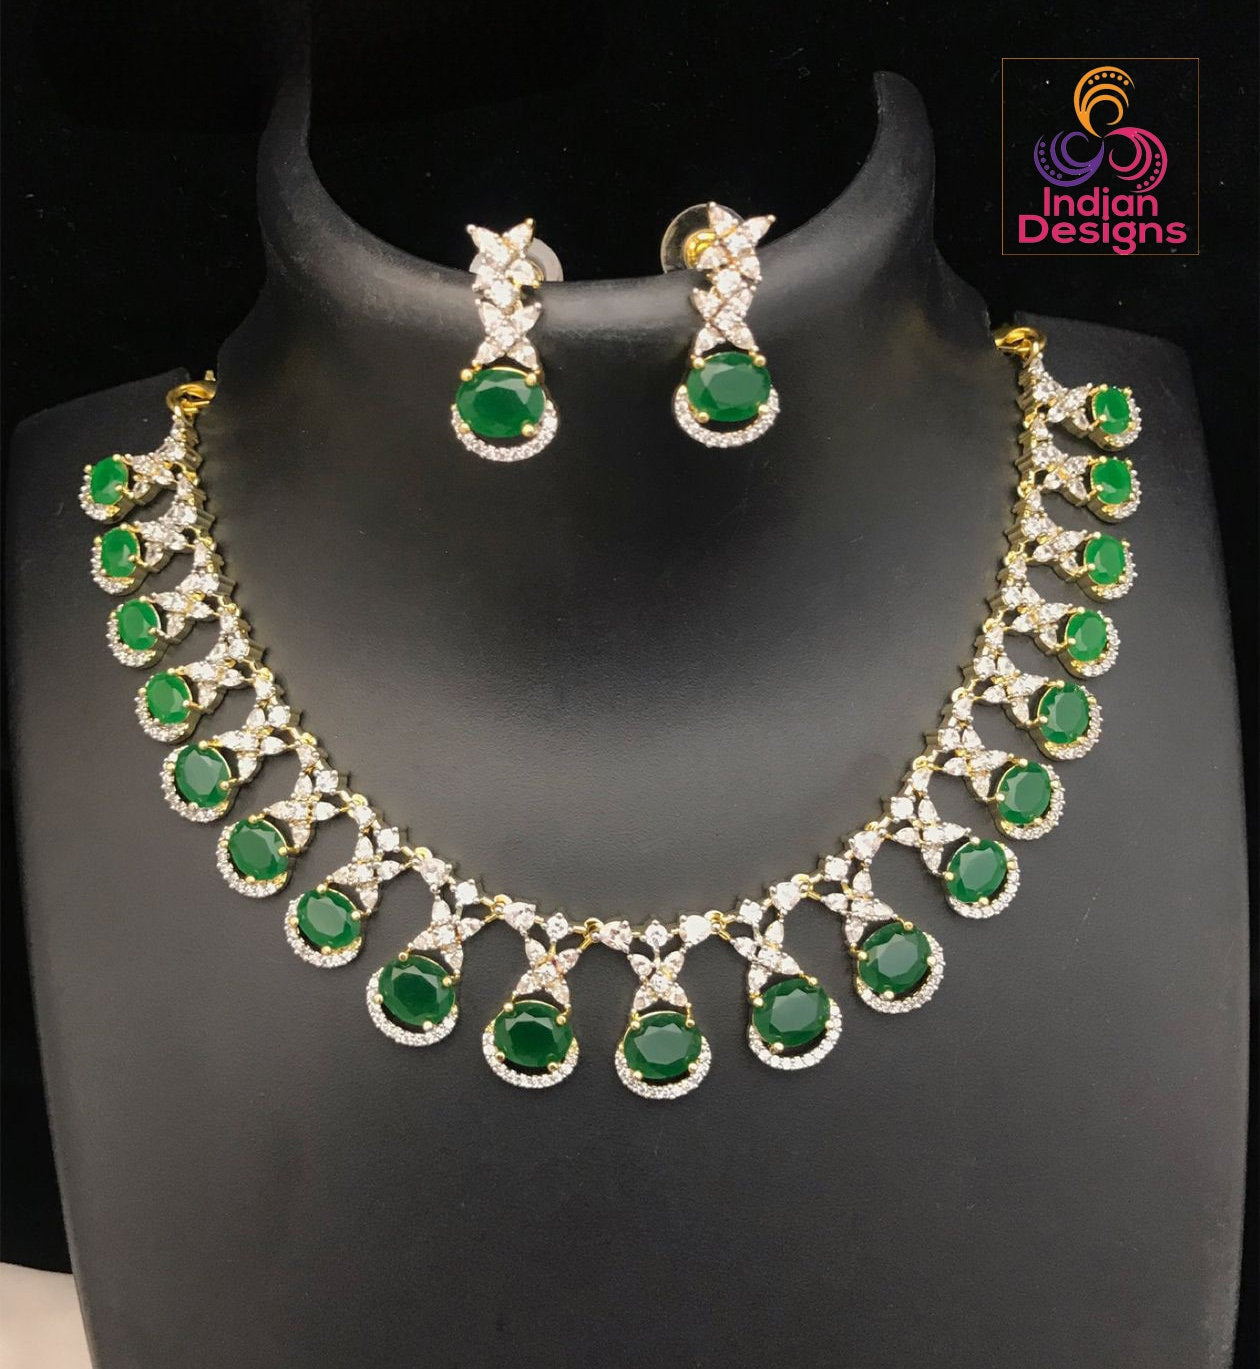 Gold Plated American Diamond Crystal Necklace & Earrings|Cubic Zirconia Ruby/Emerald Oval stone choker Necklace|Gift for her |Indian Designs